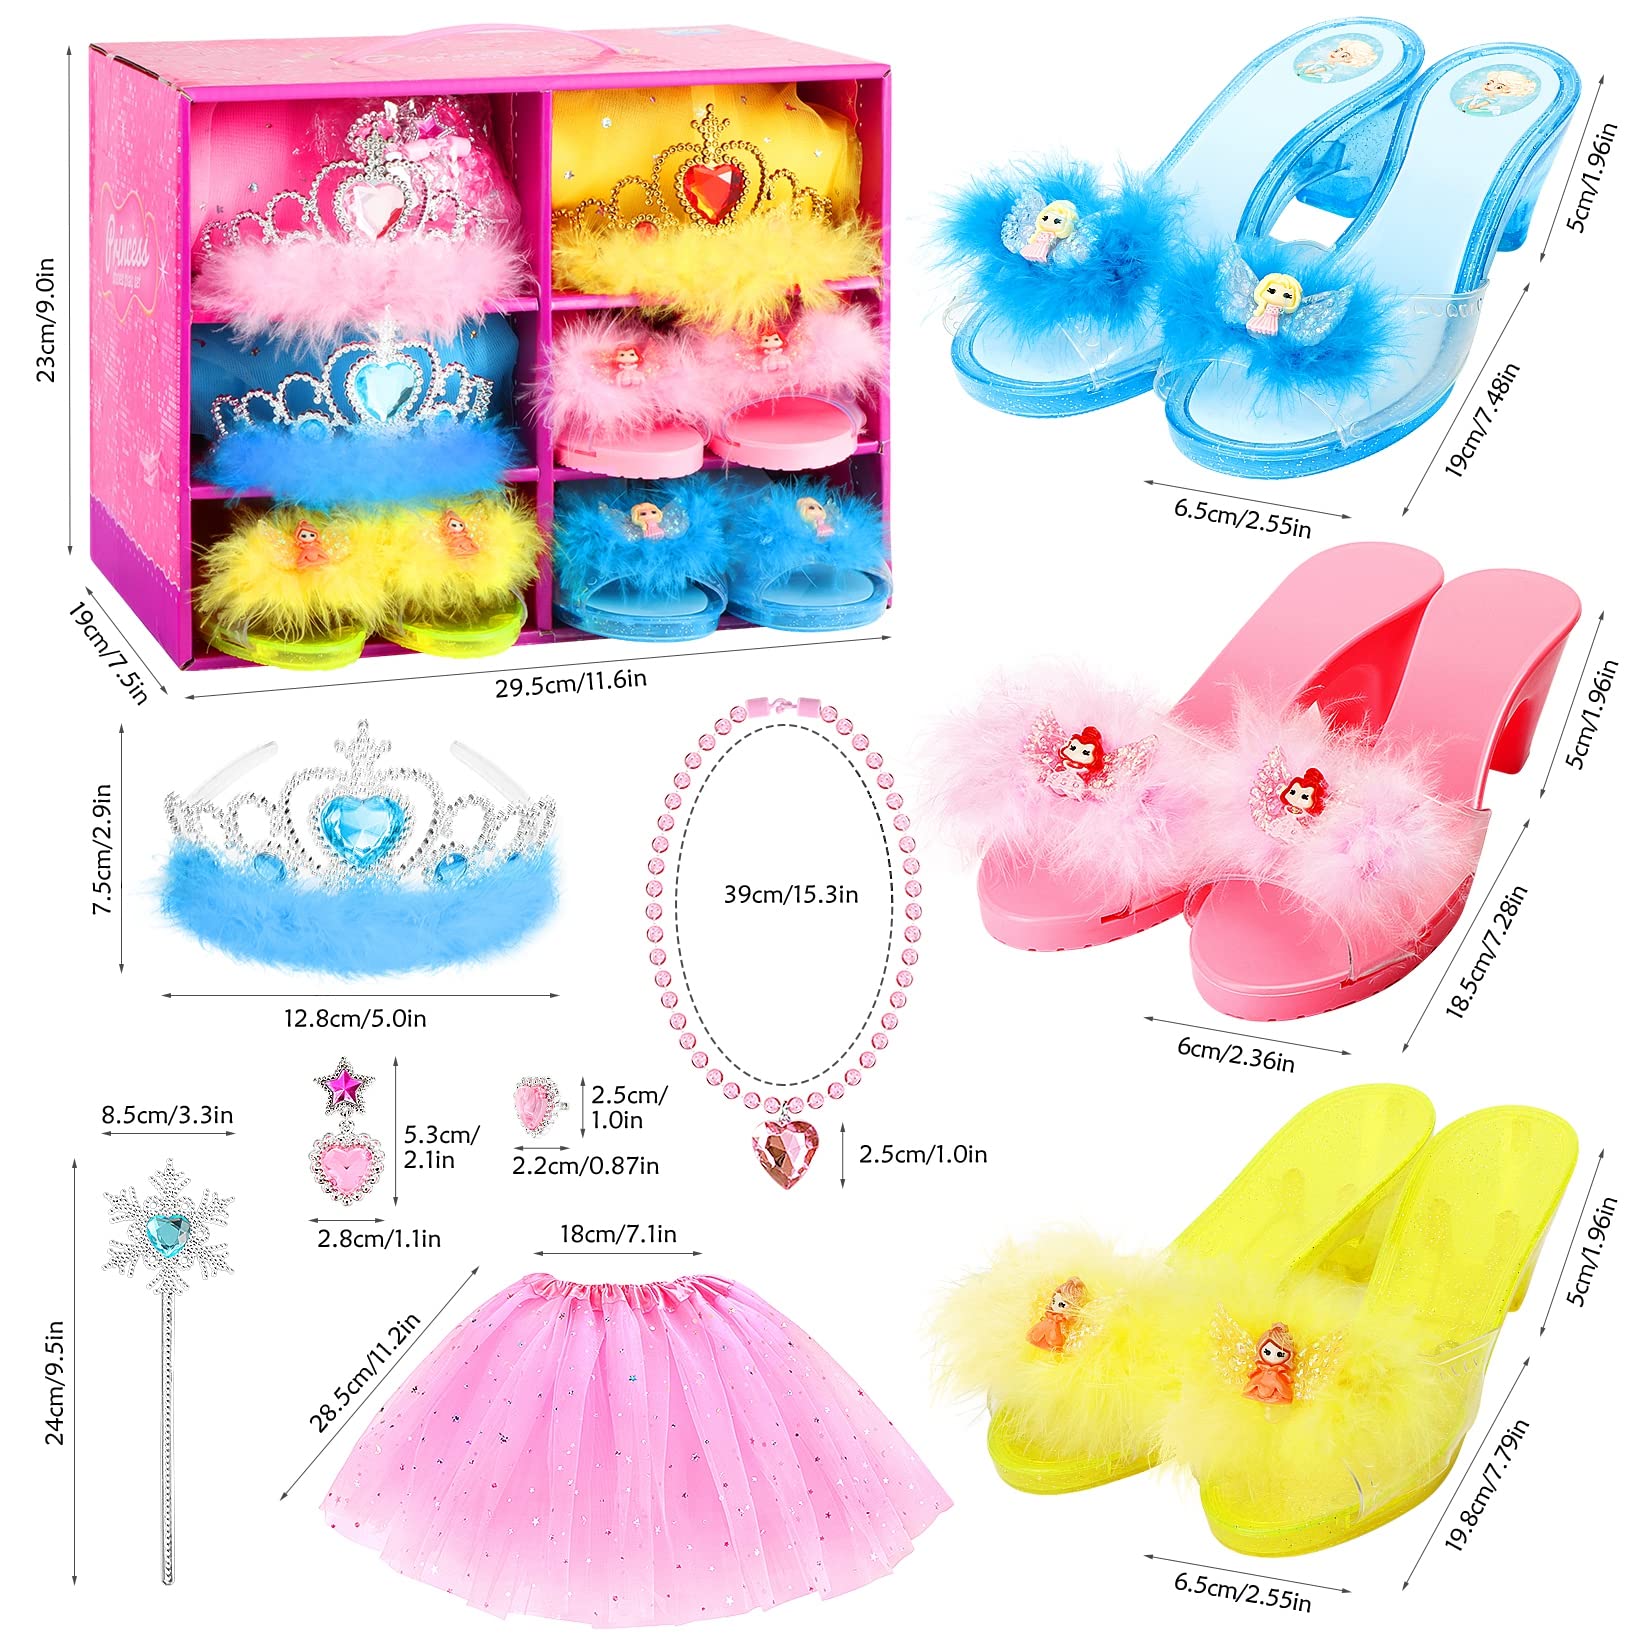 Princess Dress Up Shoes Set Princess Dresses for Girls, Mastom Dress Up Clothes Pretend Play Set with 3 Sets of Princess Shoes and Tutu Skirts Tiaras Earrings Necklace Ring Wand for Girls Age 3,4,5,6